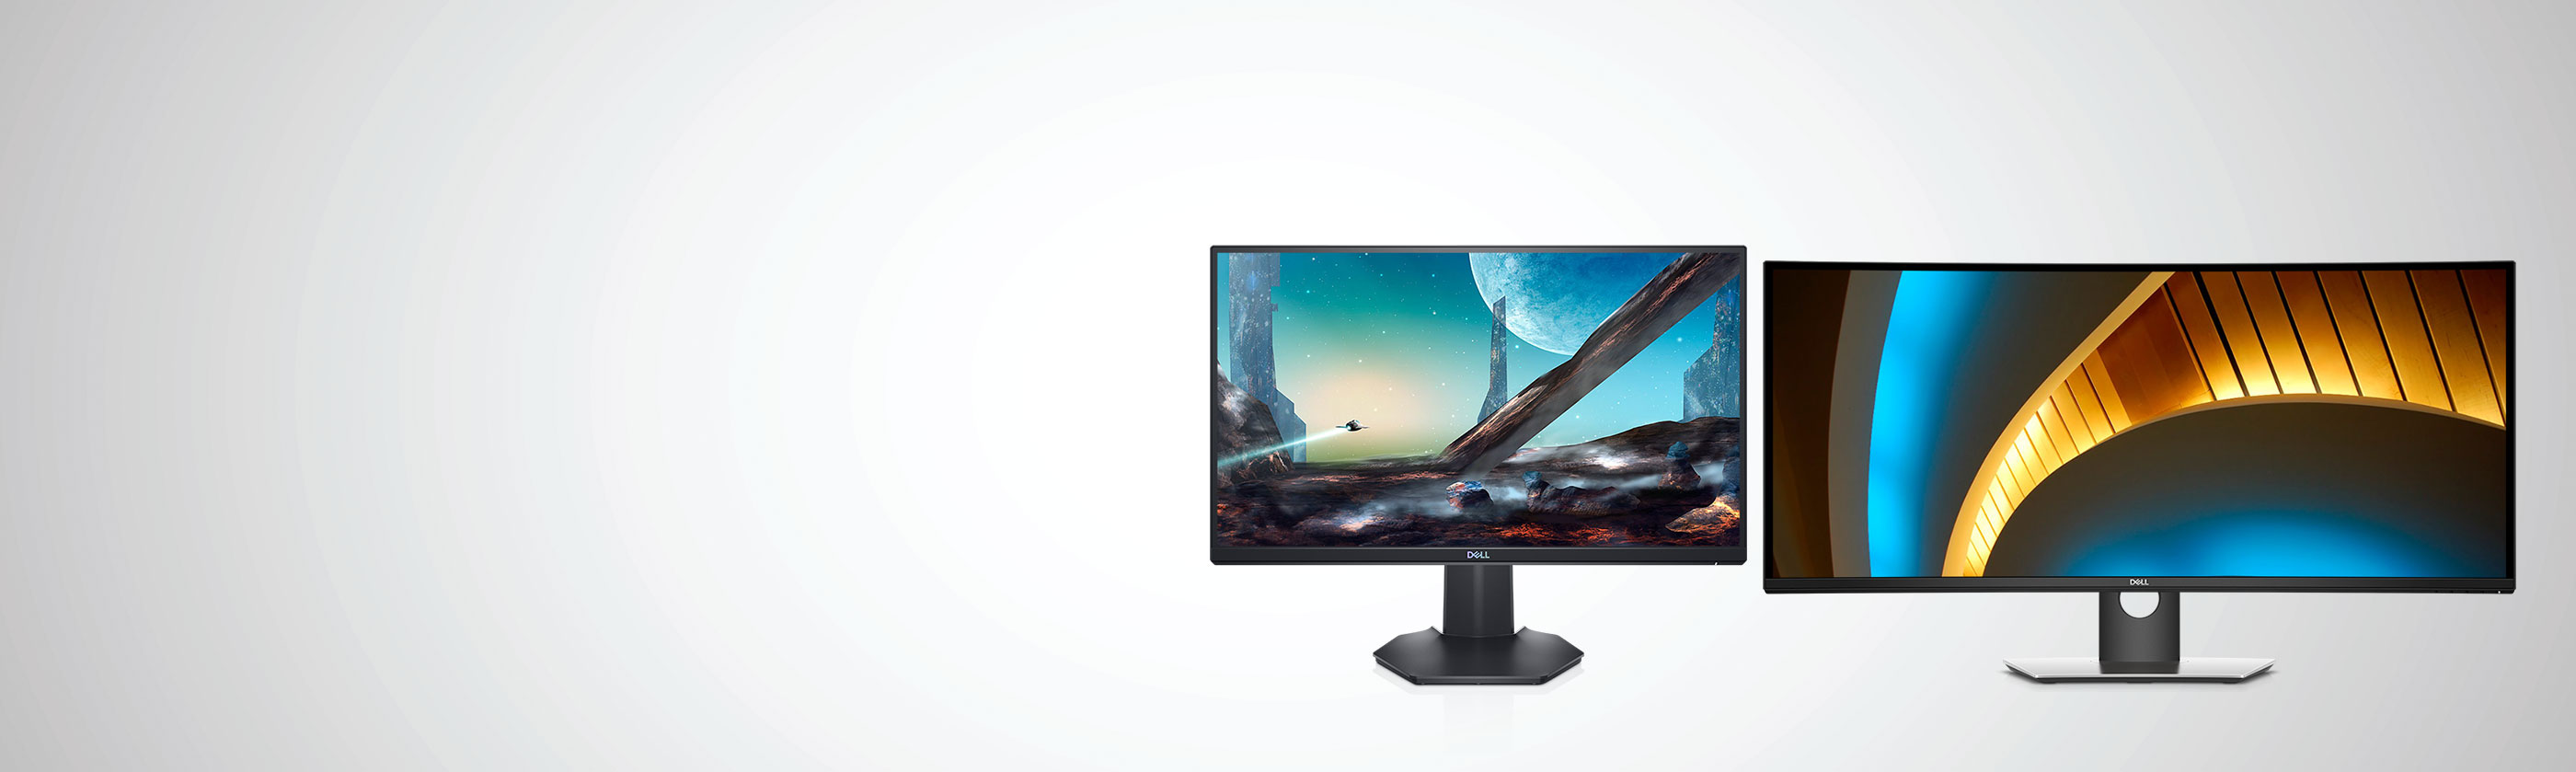 Dell Monitor Buying Guide | Dell Ireland